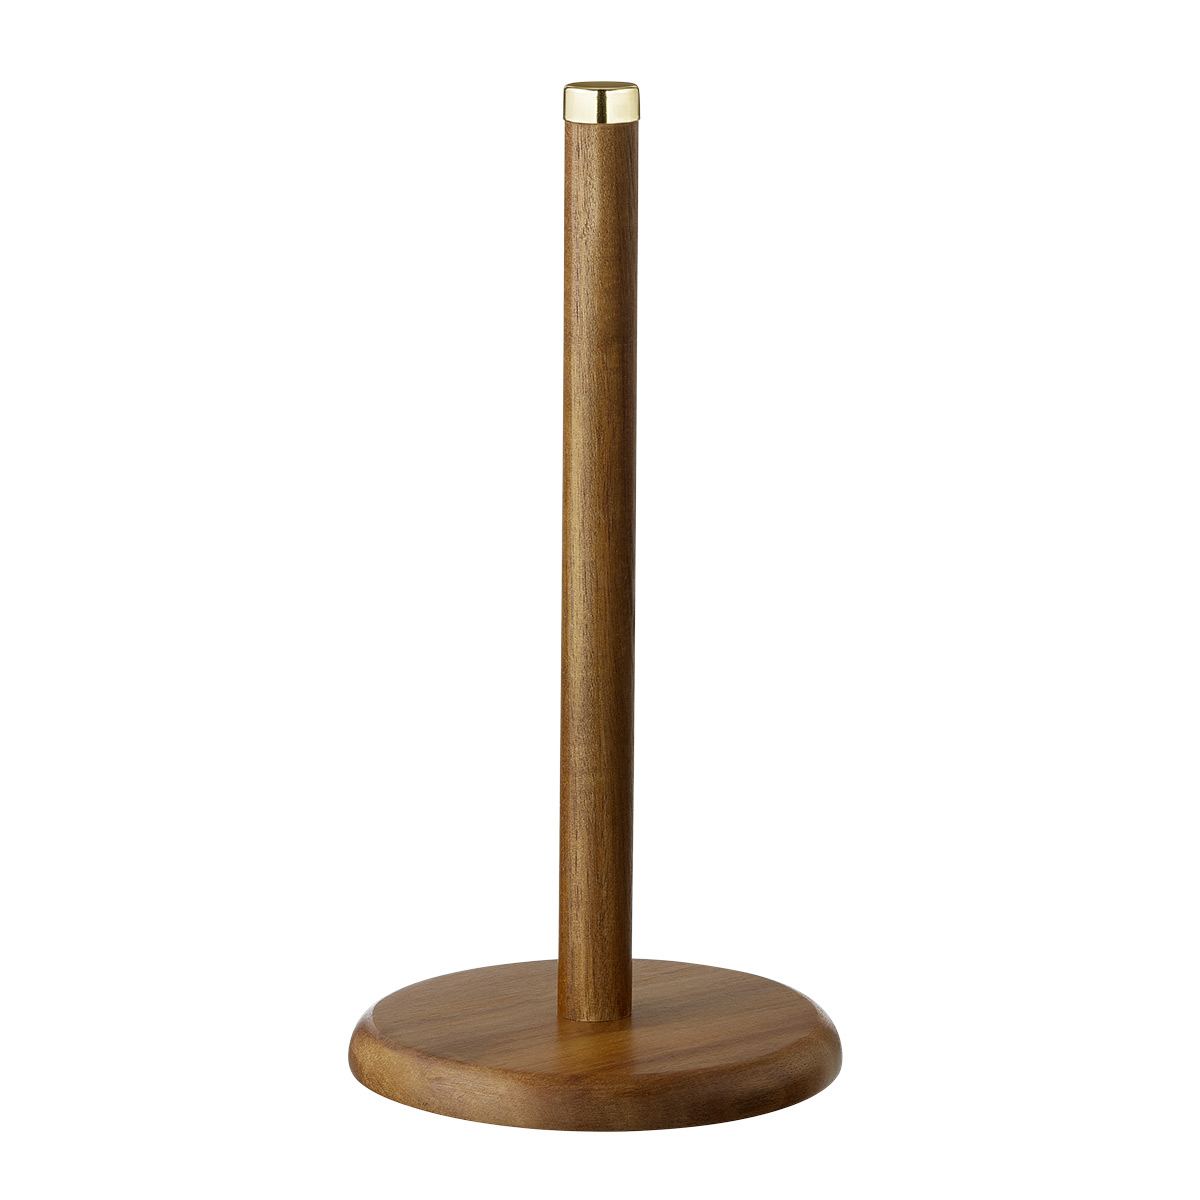 https://www.containerstore.com/catalogimages/453334/10089887_Acaia_Paper_Towel_Holder_Si.jpg